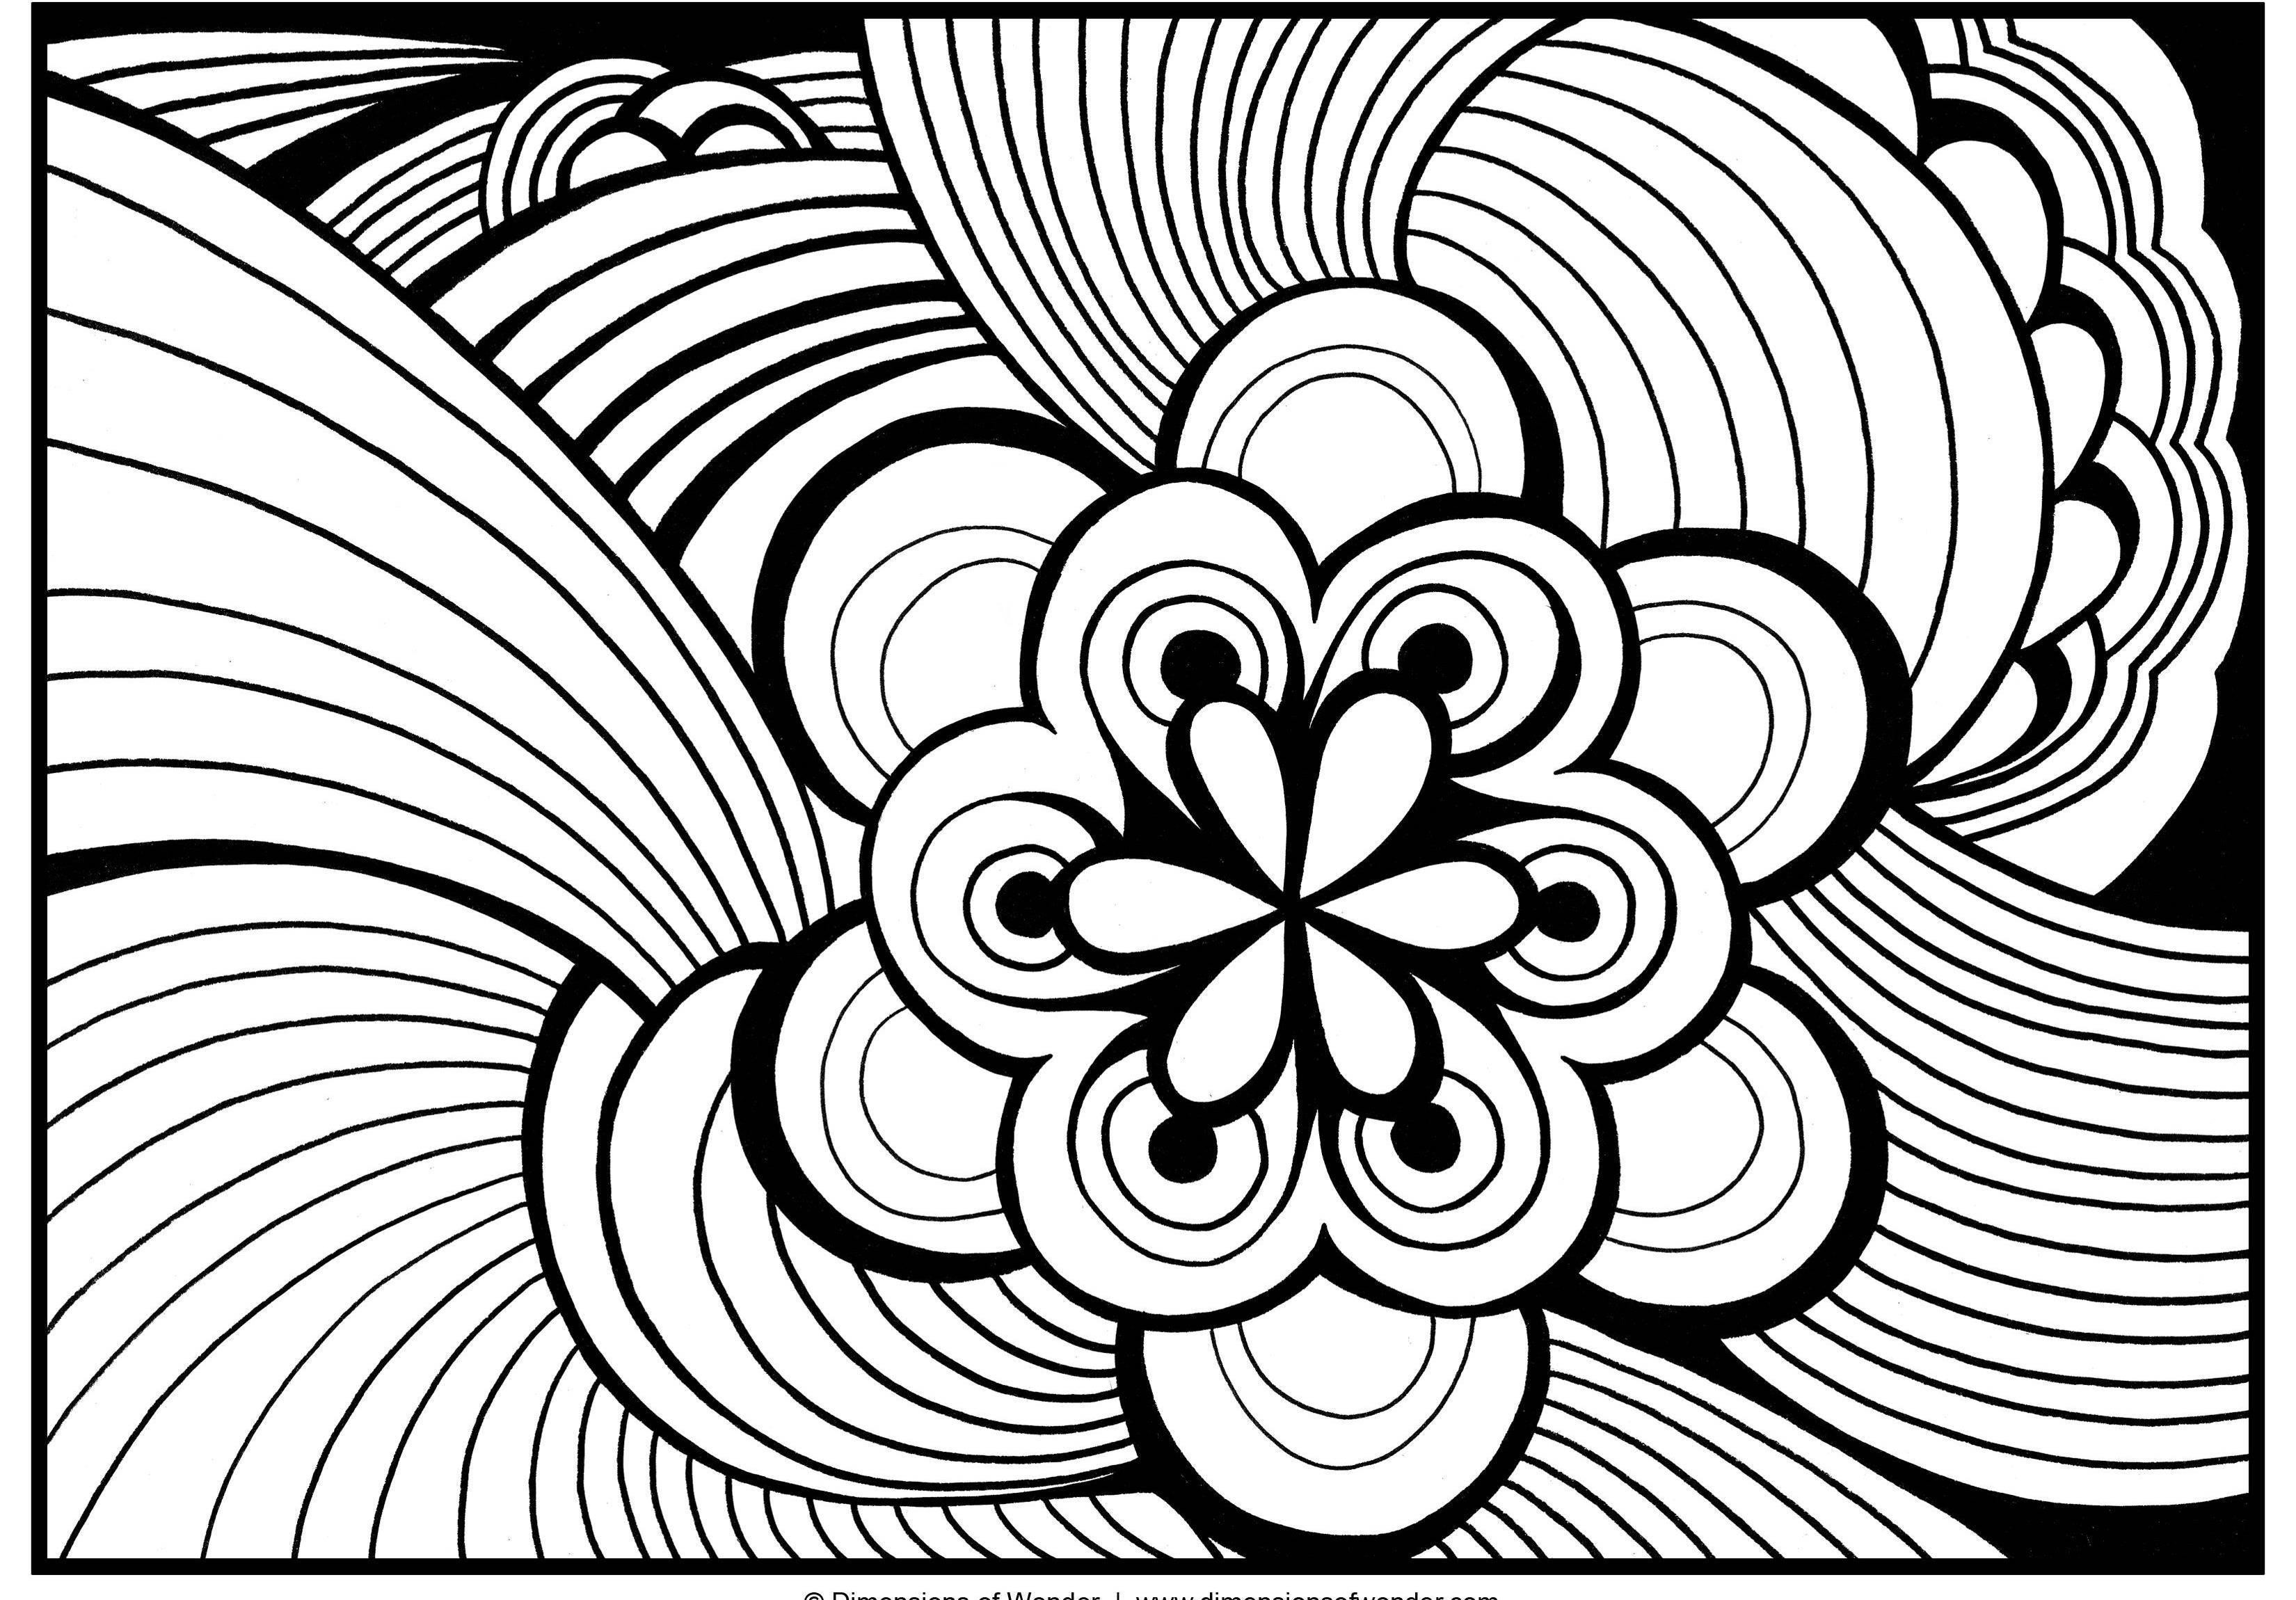 Coloring Pages For Adults Abstract Flowers
 Free Printable to Color for Adults 51 Coloring